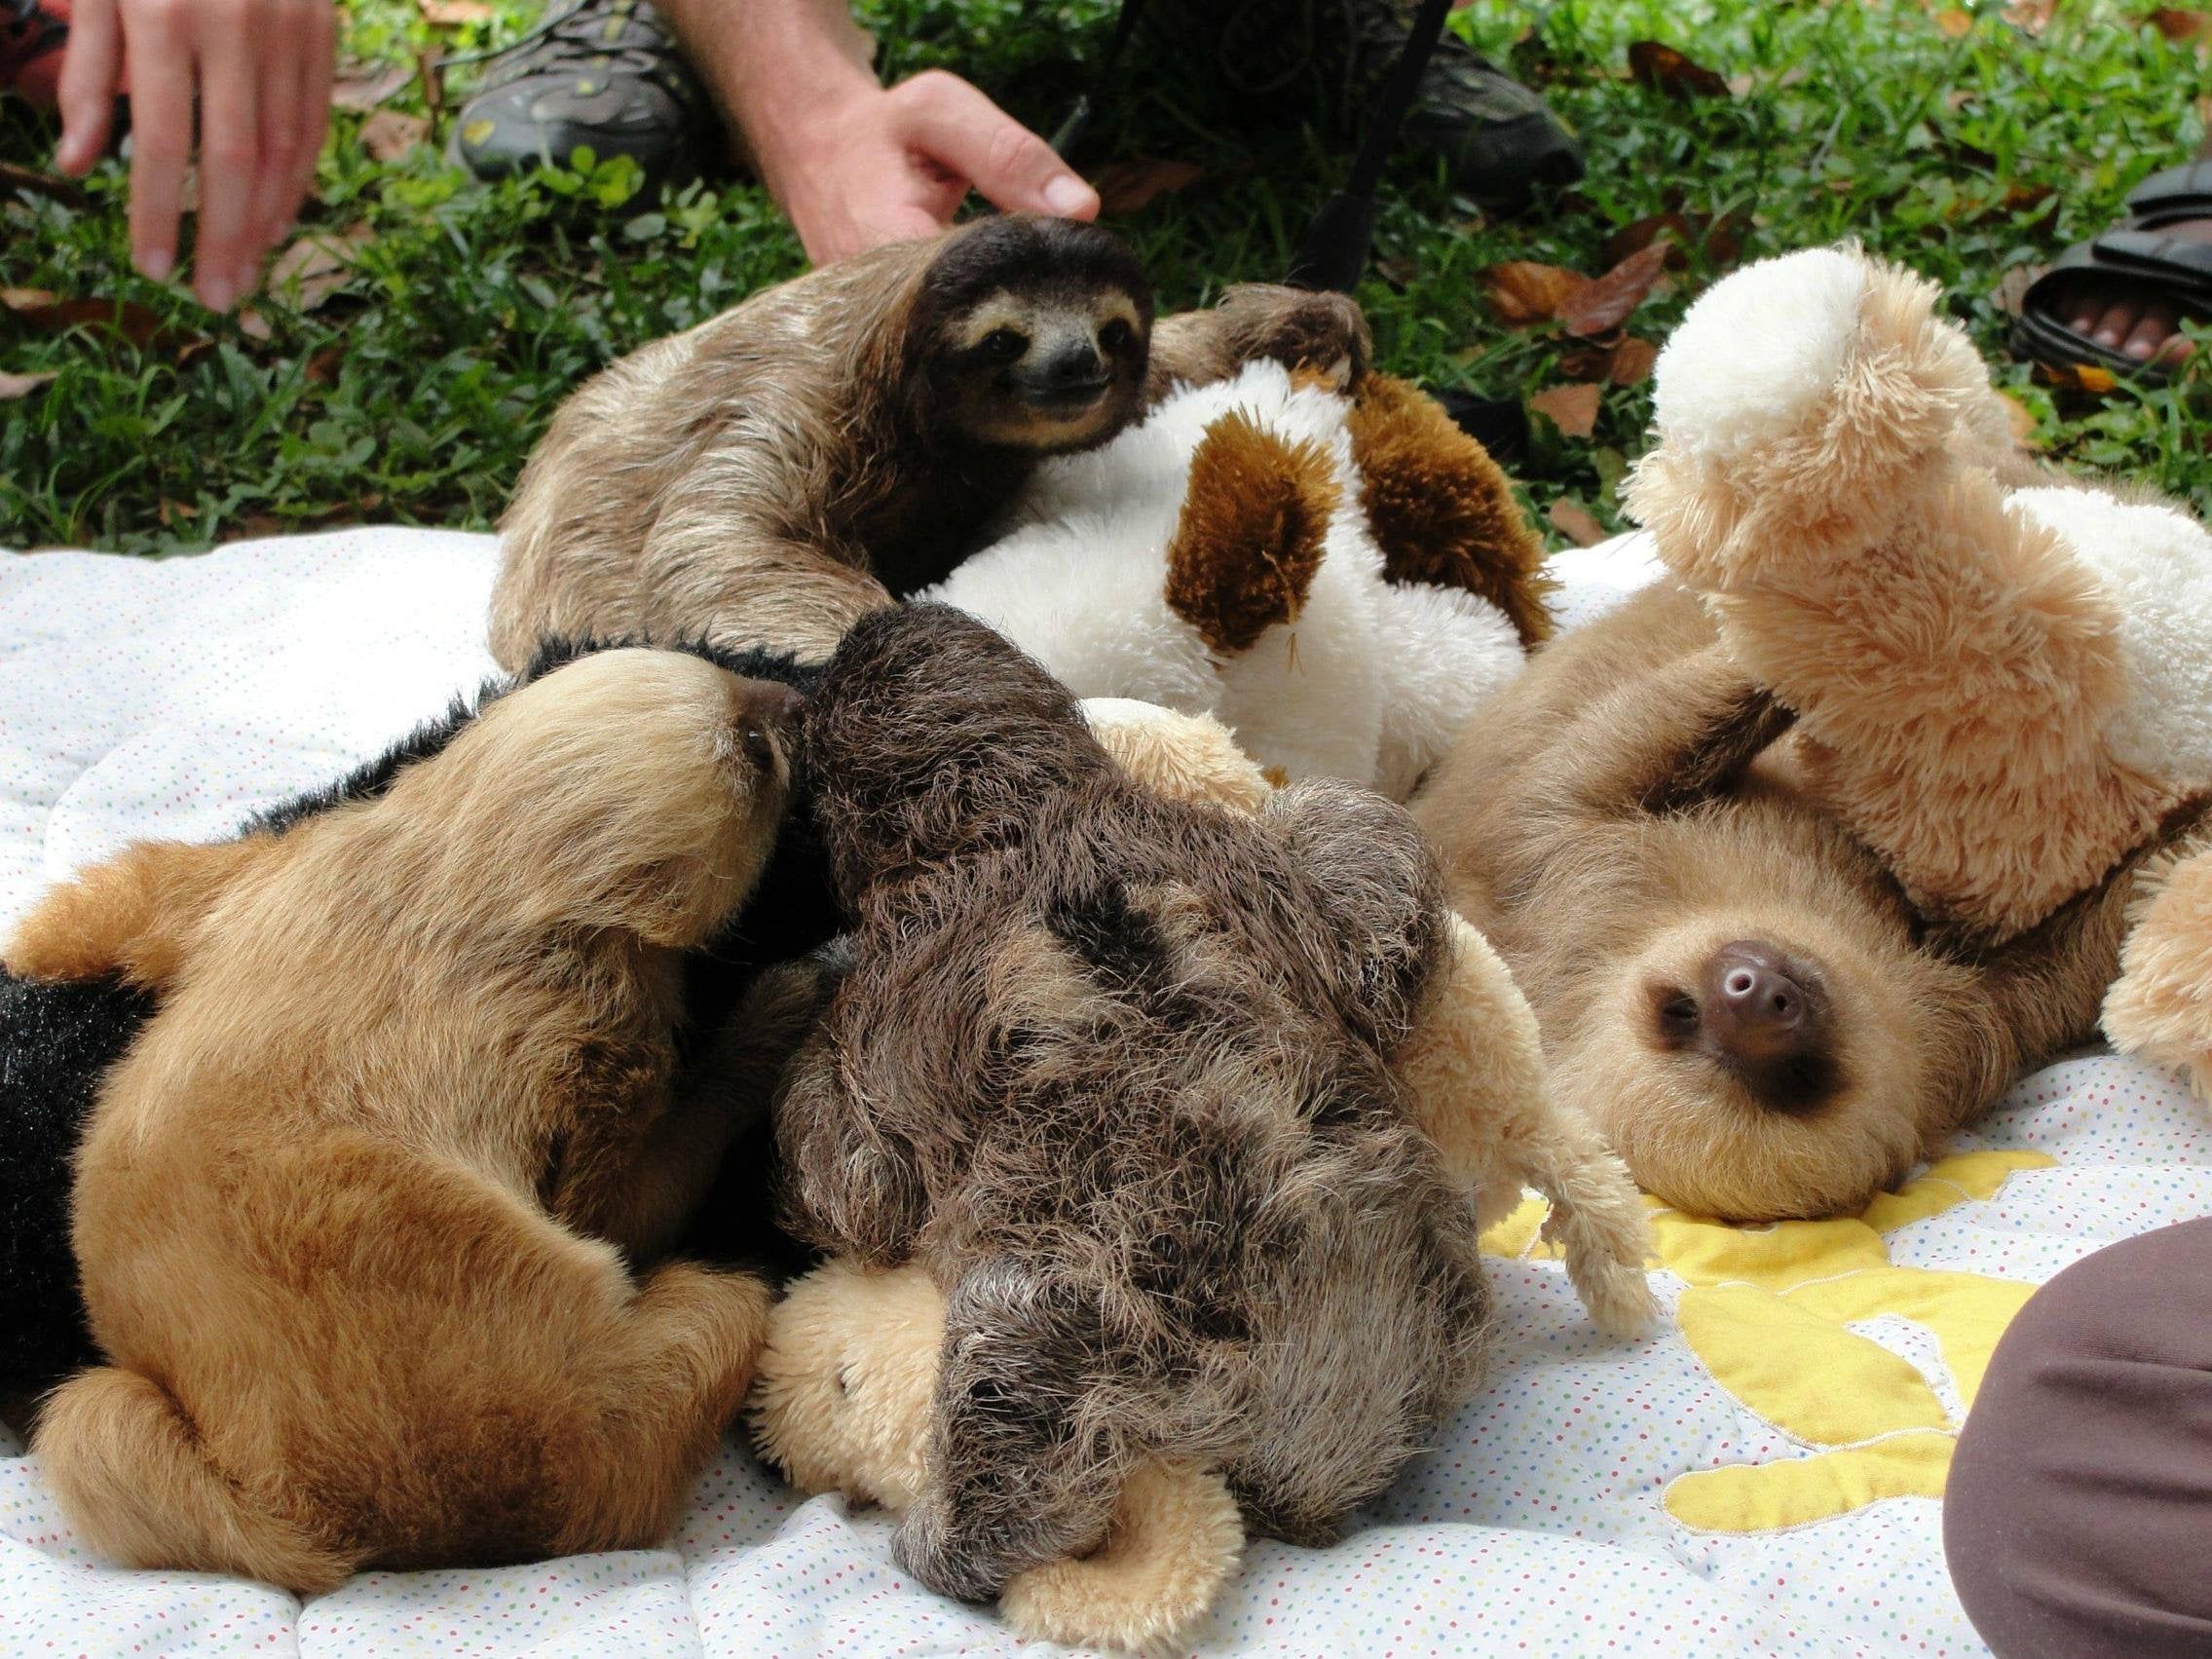 Baby Sloths Cuddling With Stuffed Animals. X Post From R Aww